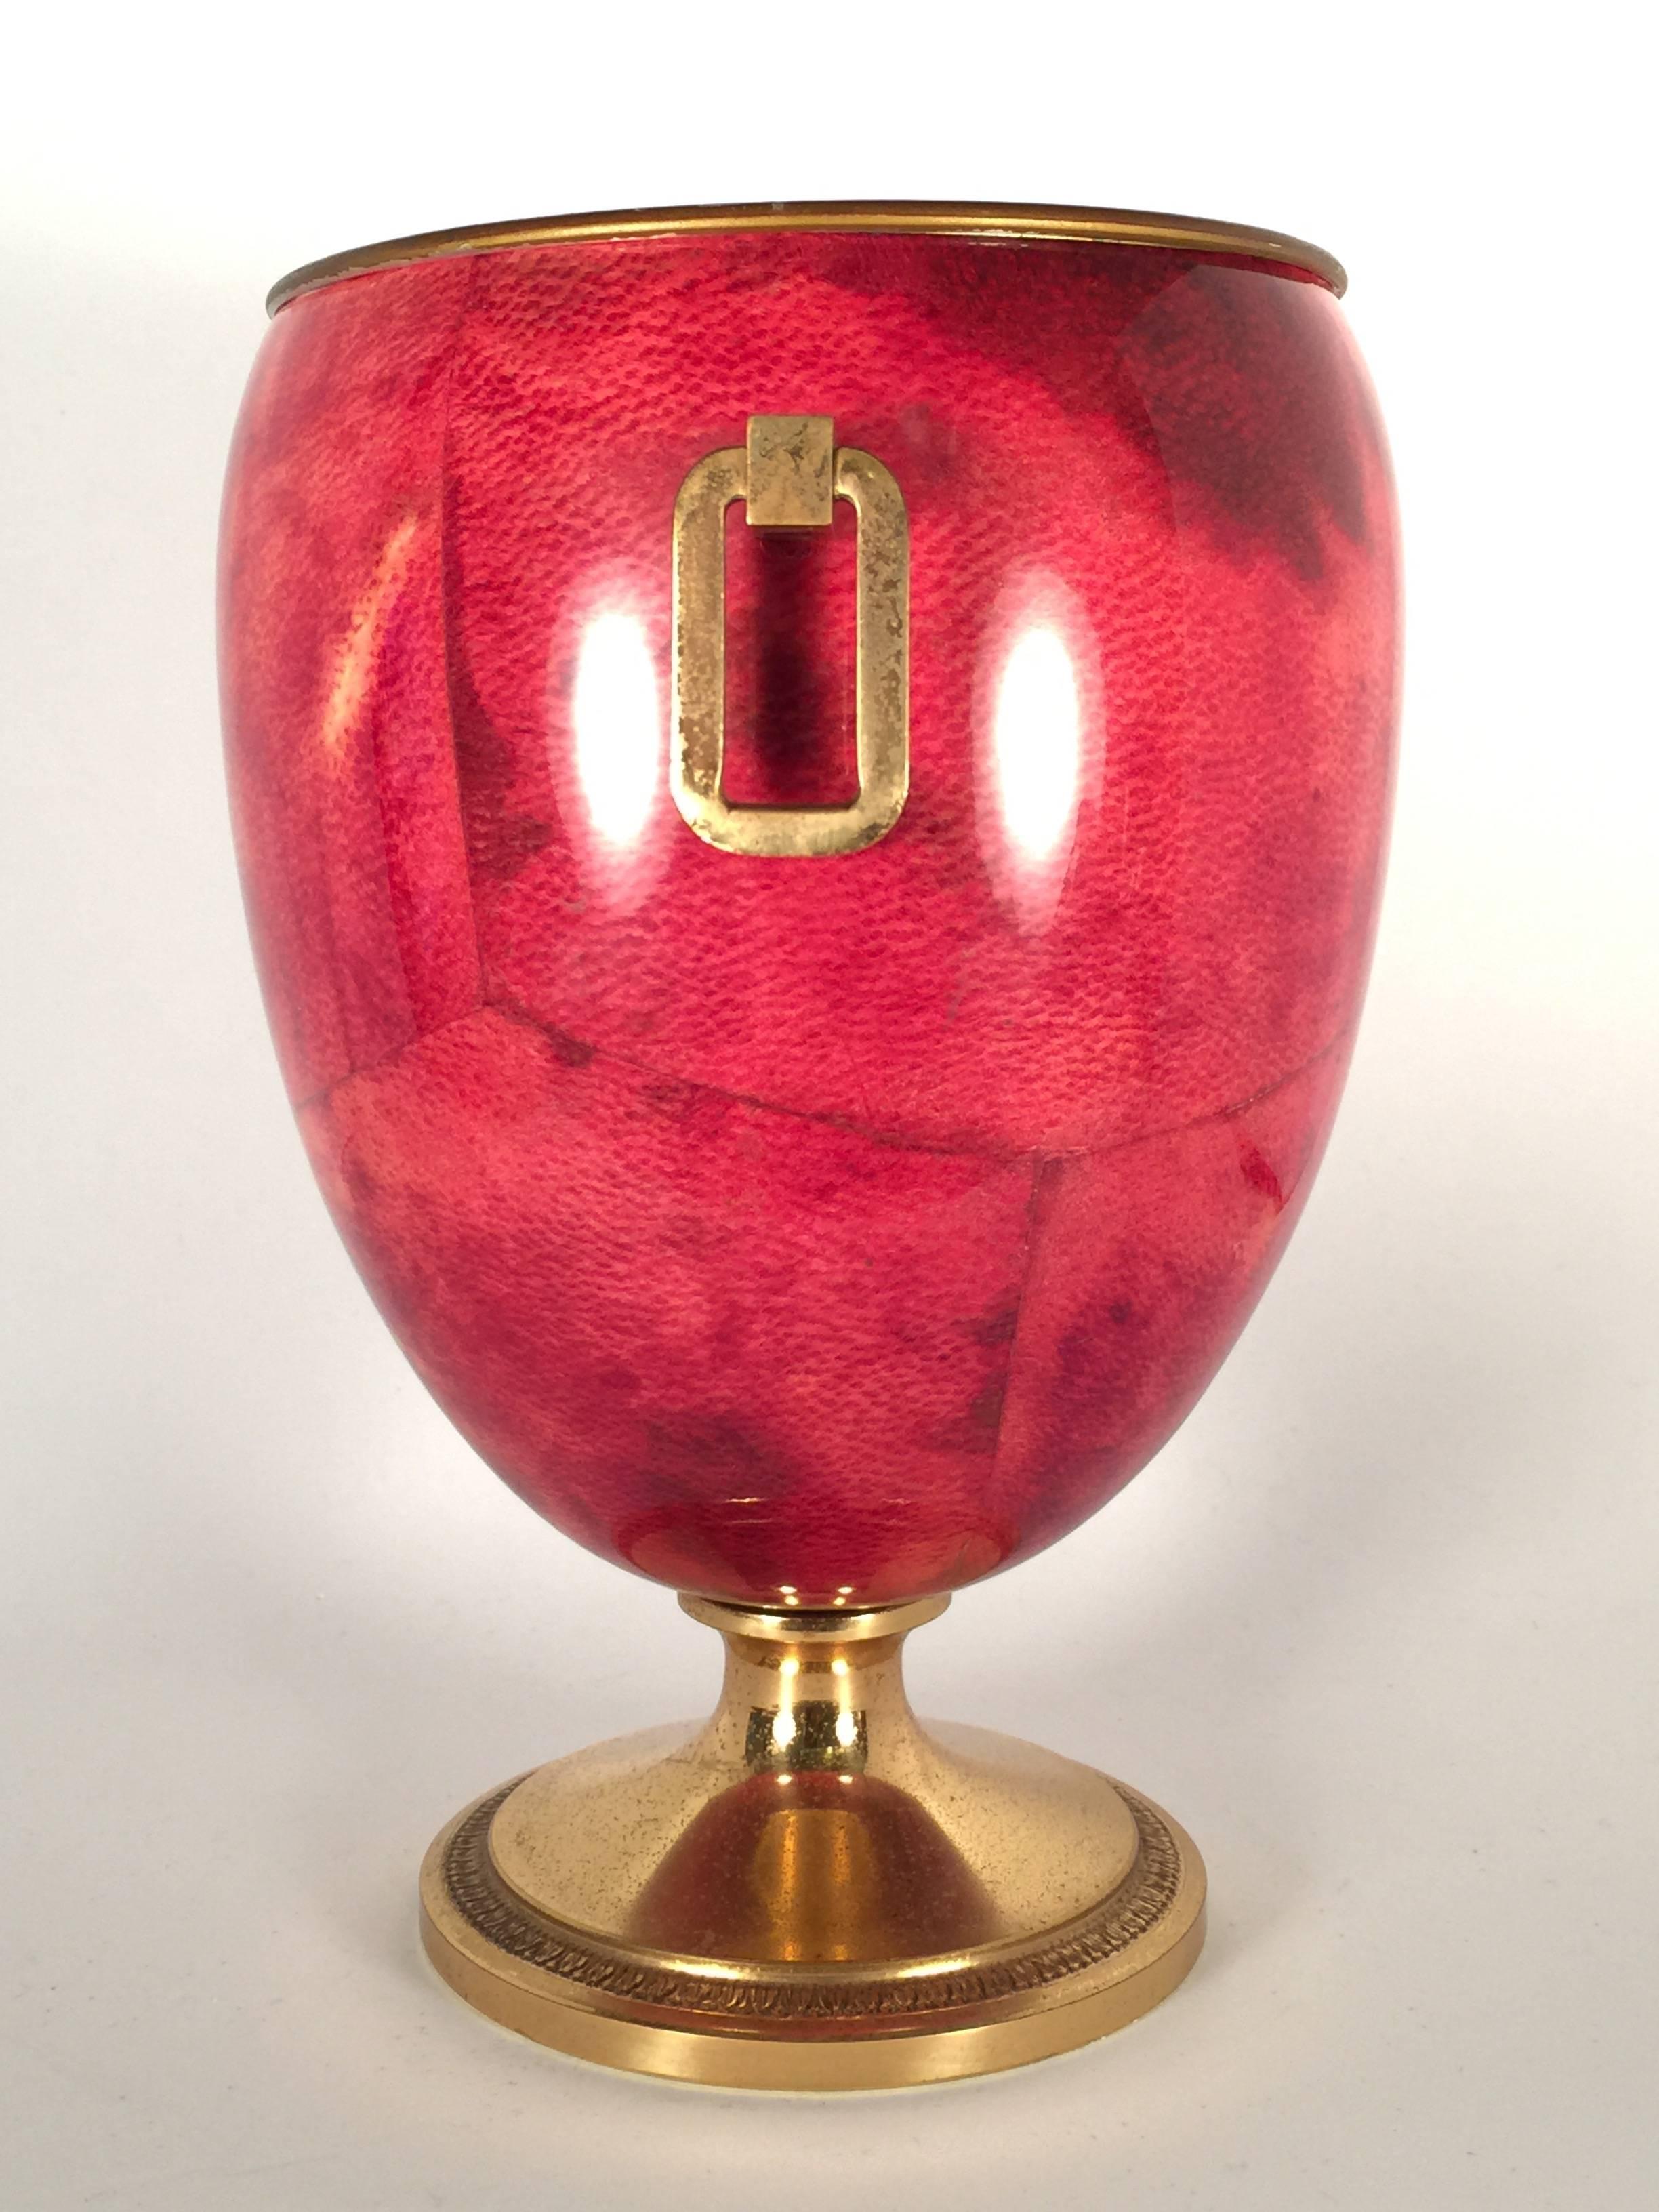 Vintage Aldo Tura ruby red lacquered goatskin and brass ice bucket.
1940s made in Italy.

This piece is in good vintage condition with porous grains on the brass details.

An amazing and seldom piece in this condition.